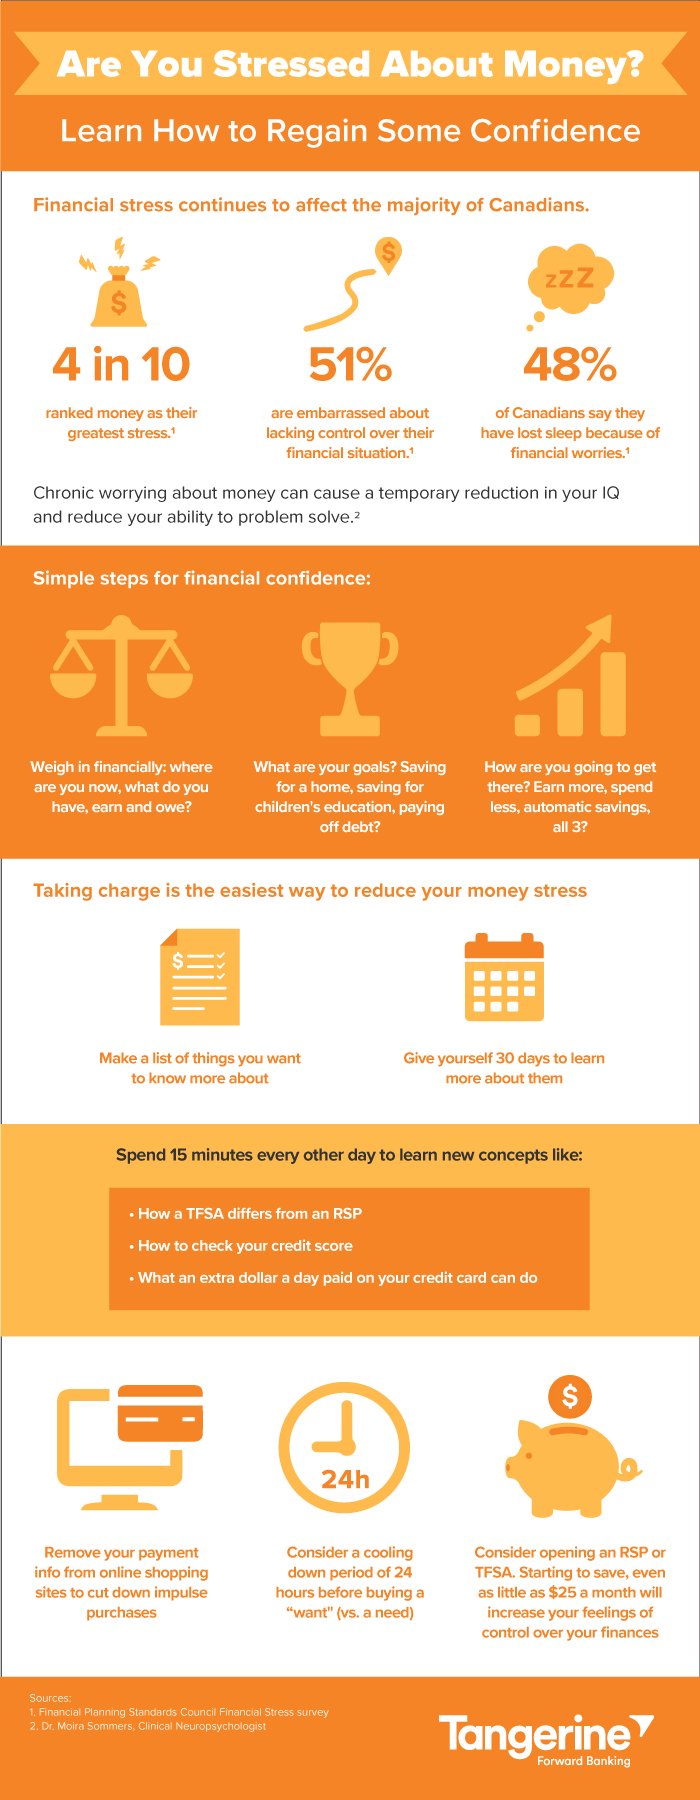 Infographic that provides simple steps for financial confidence